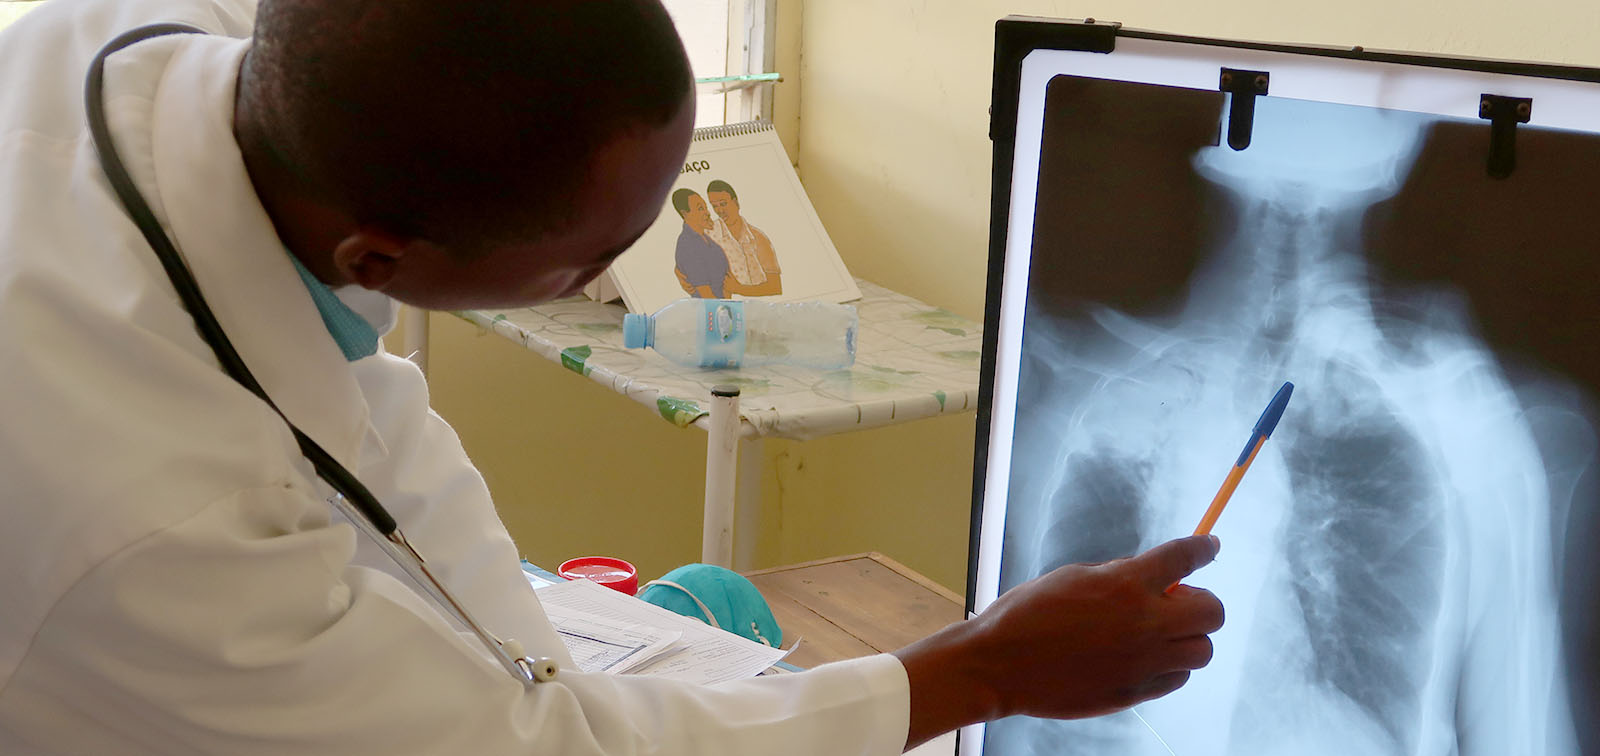 A CISM researcher observes the X-ray of a patient at the Manhiça Hospital, in Mozambique